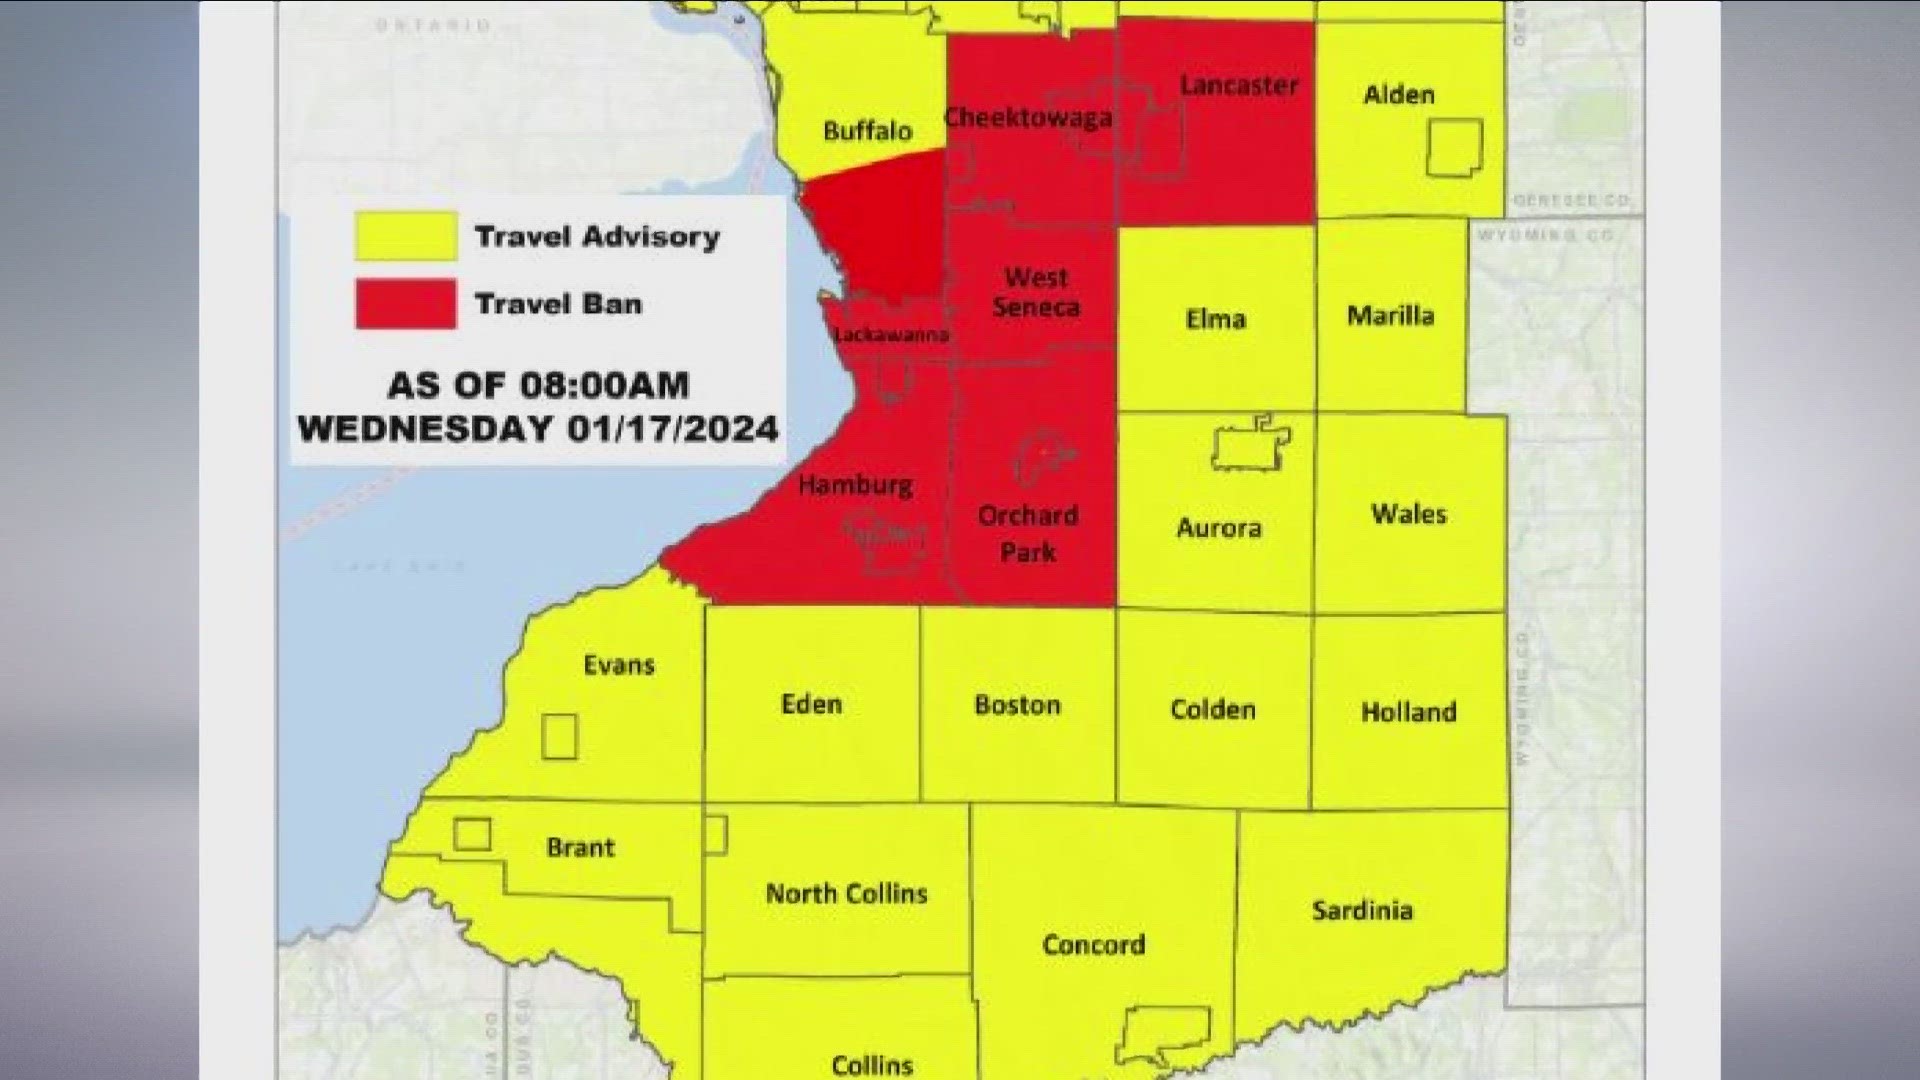 Travel bans in WNY as of 11a.m. during midday